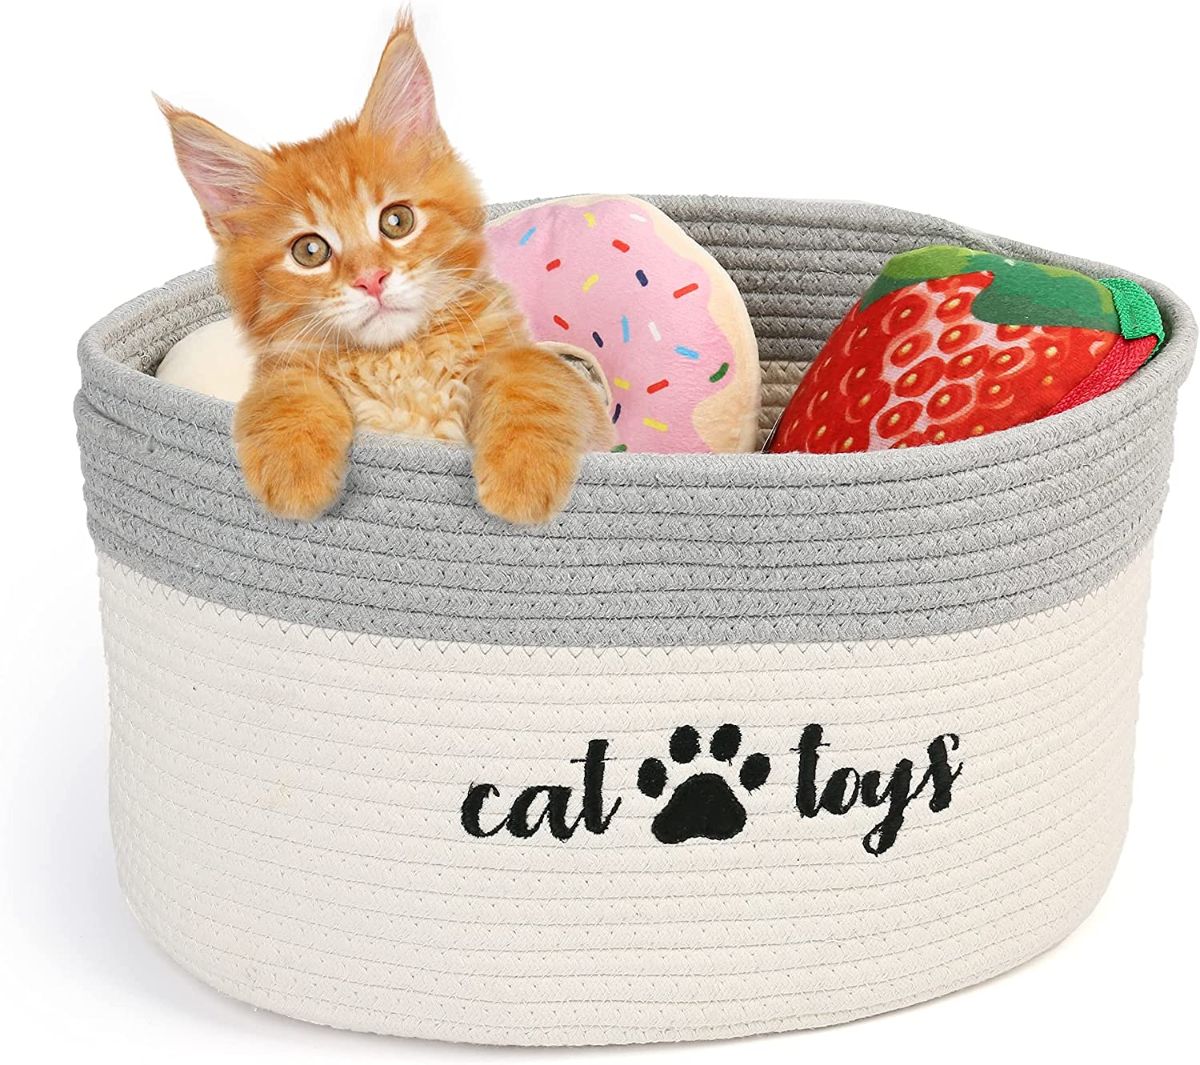 A cat basket with toys.